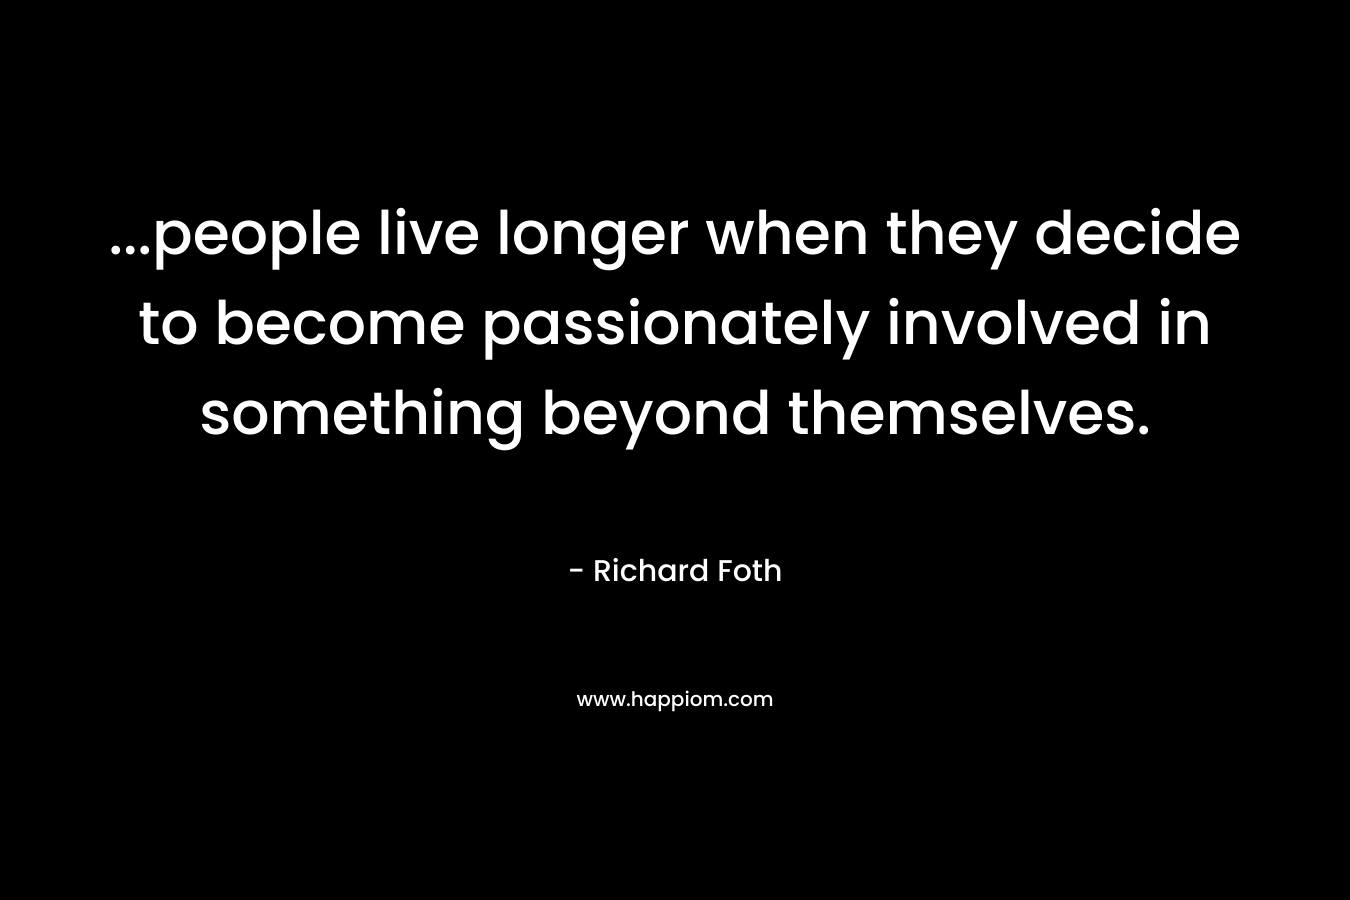 ...people live longer when they decide to become passionately involved in something beyond themselves.